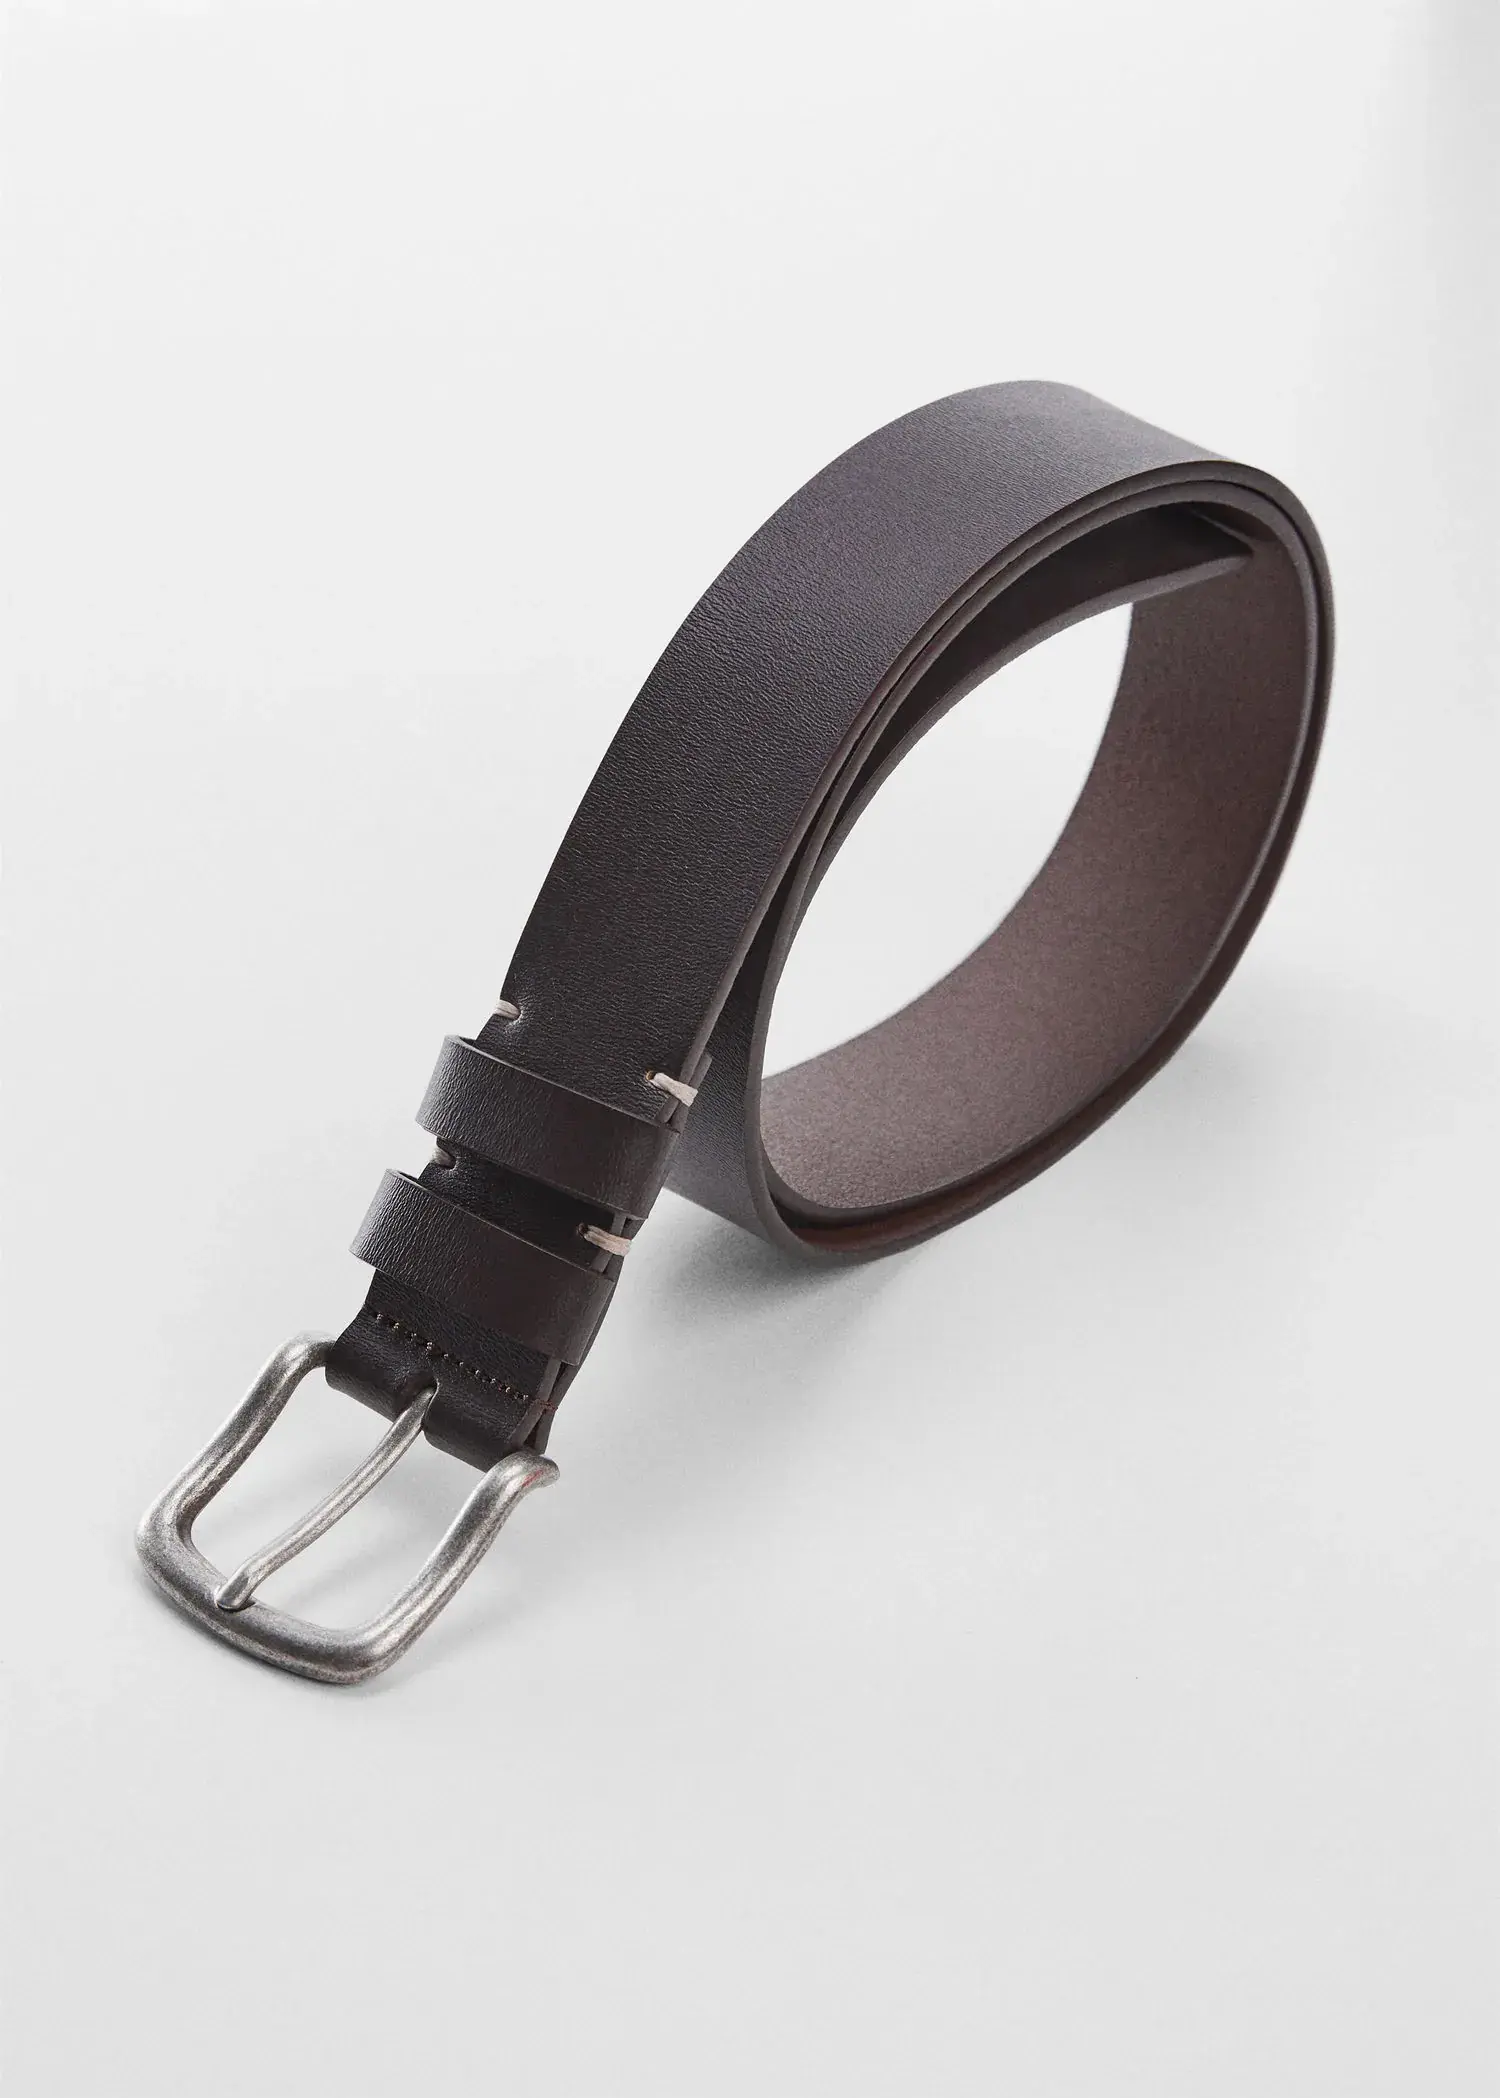 Mango Buckle leather belt. a brown leather belt with a silver buckle. 